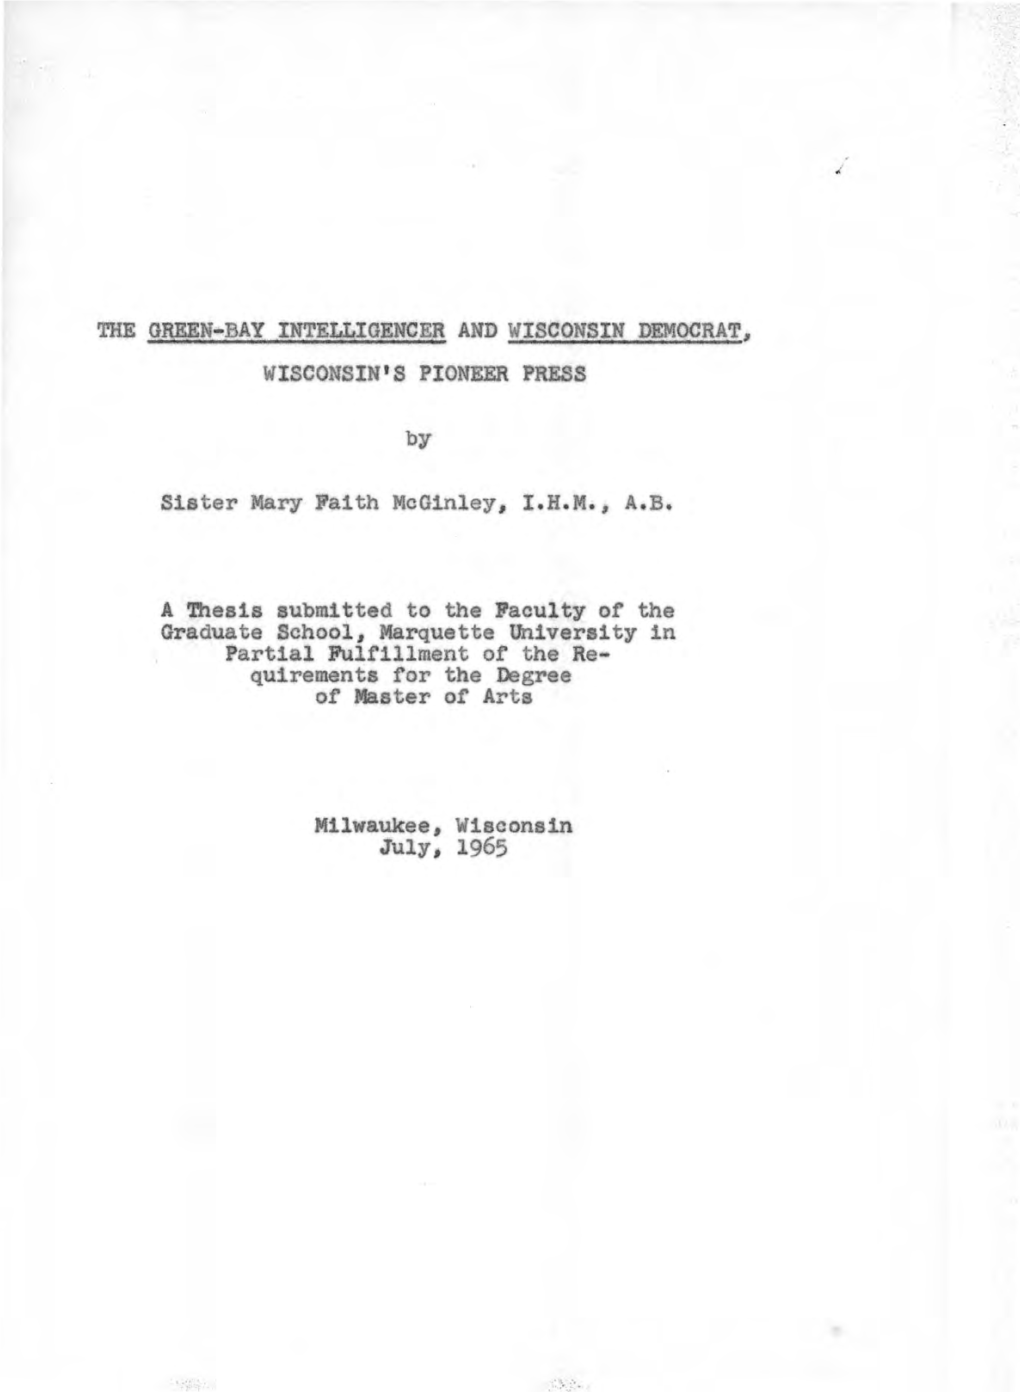 By Sister Mary Fa1th Mcg1nley, I.H.M., A. B. a Thesis Submitted To